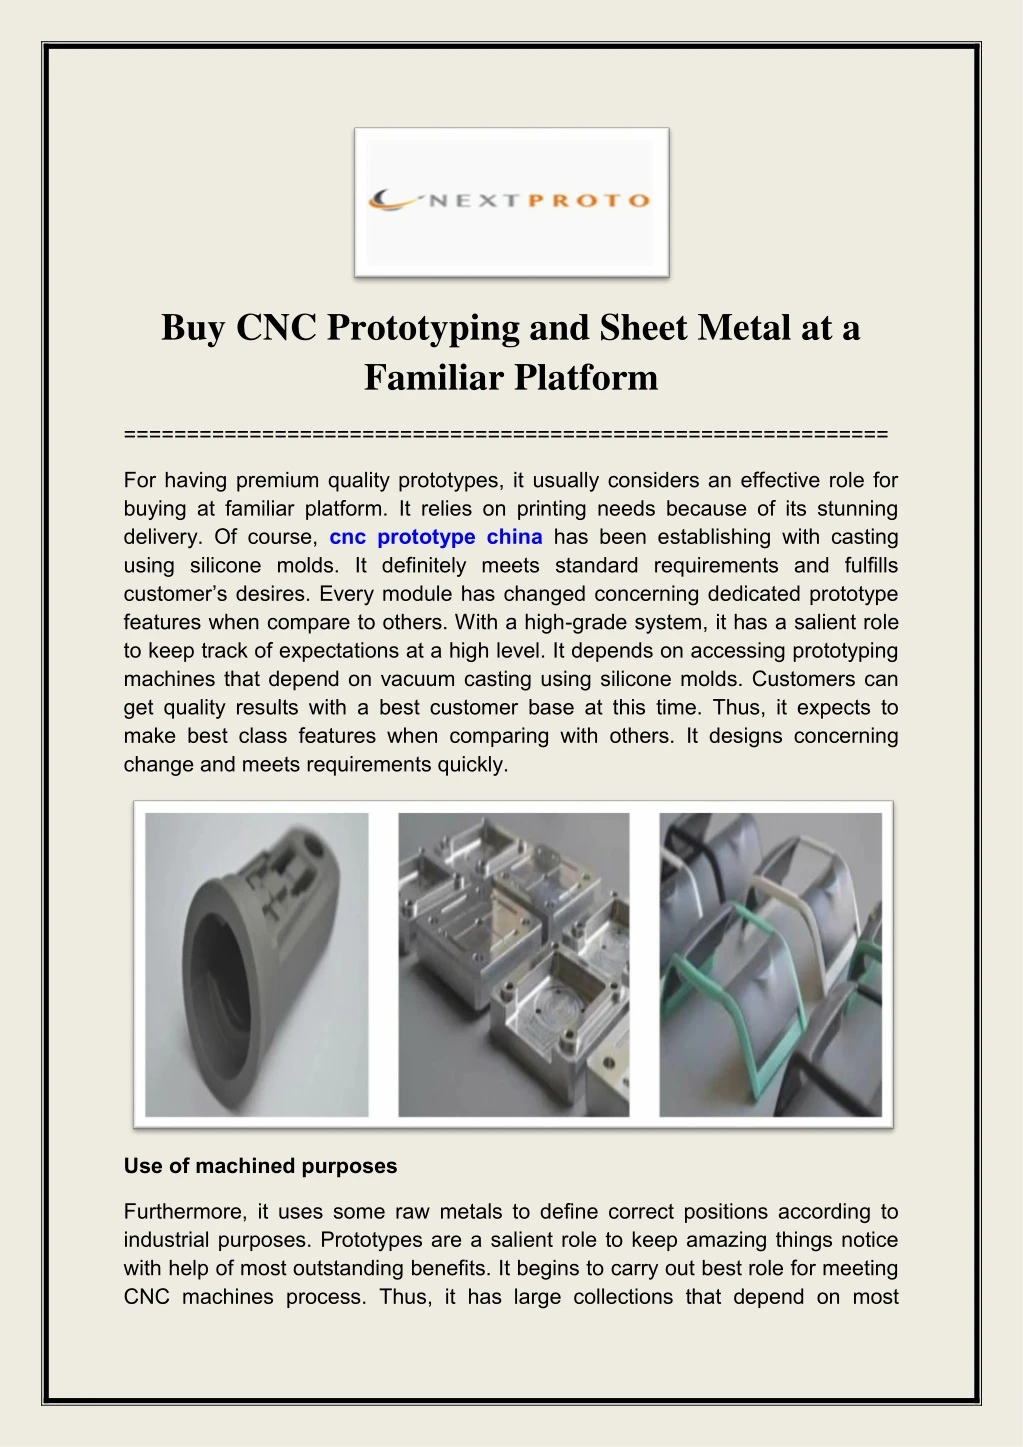 buy cnc prototyping and sheet metal at a familiar